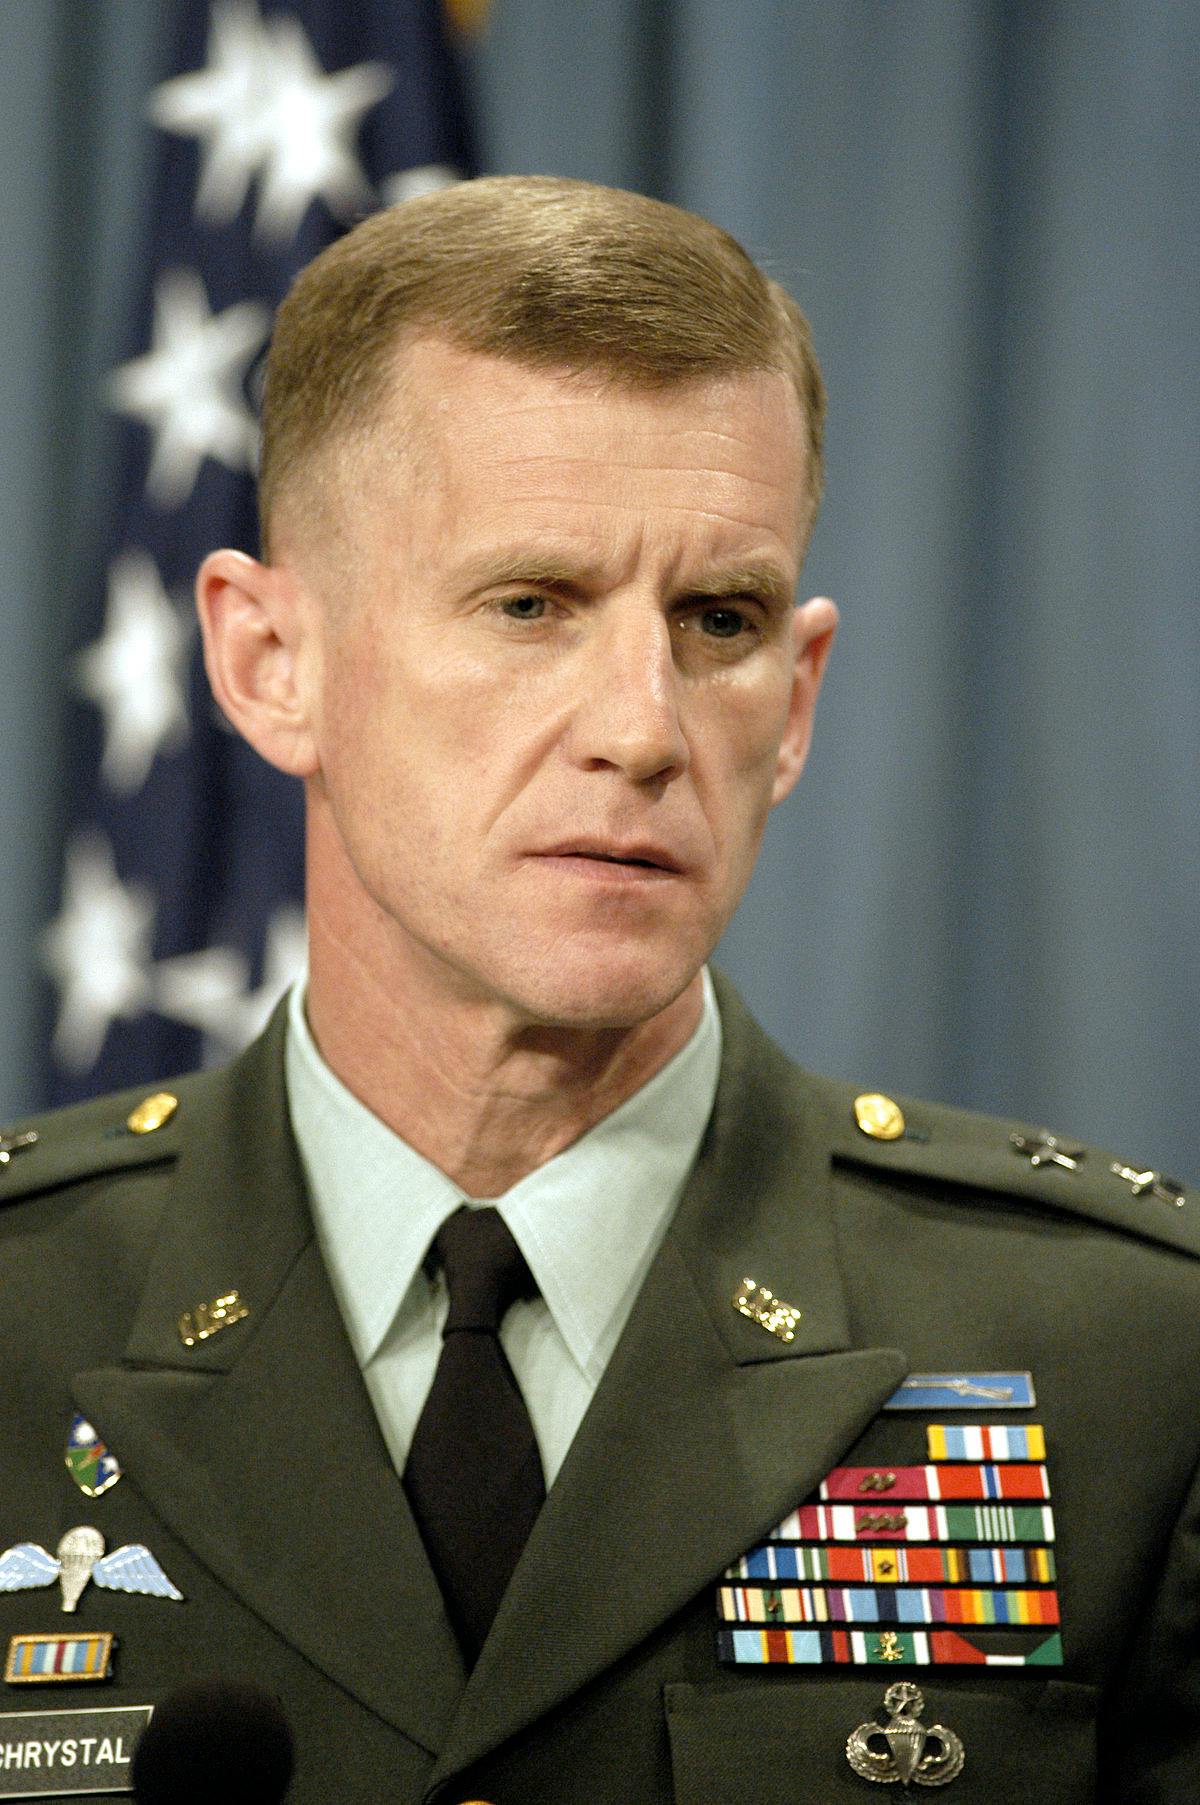 General (RET.) Stan McChrystal will be the event keynote speaker at CONSULT 2022